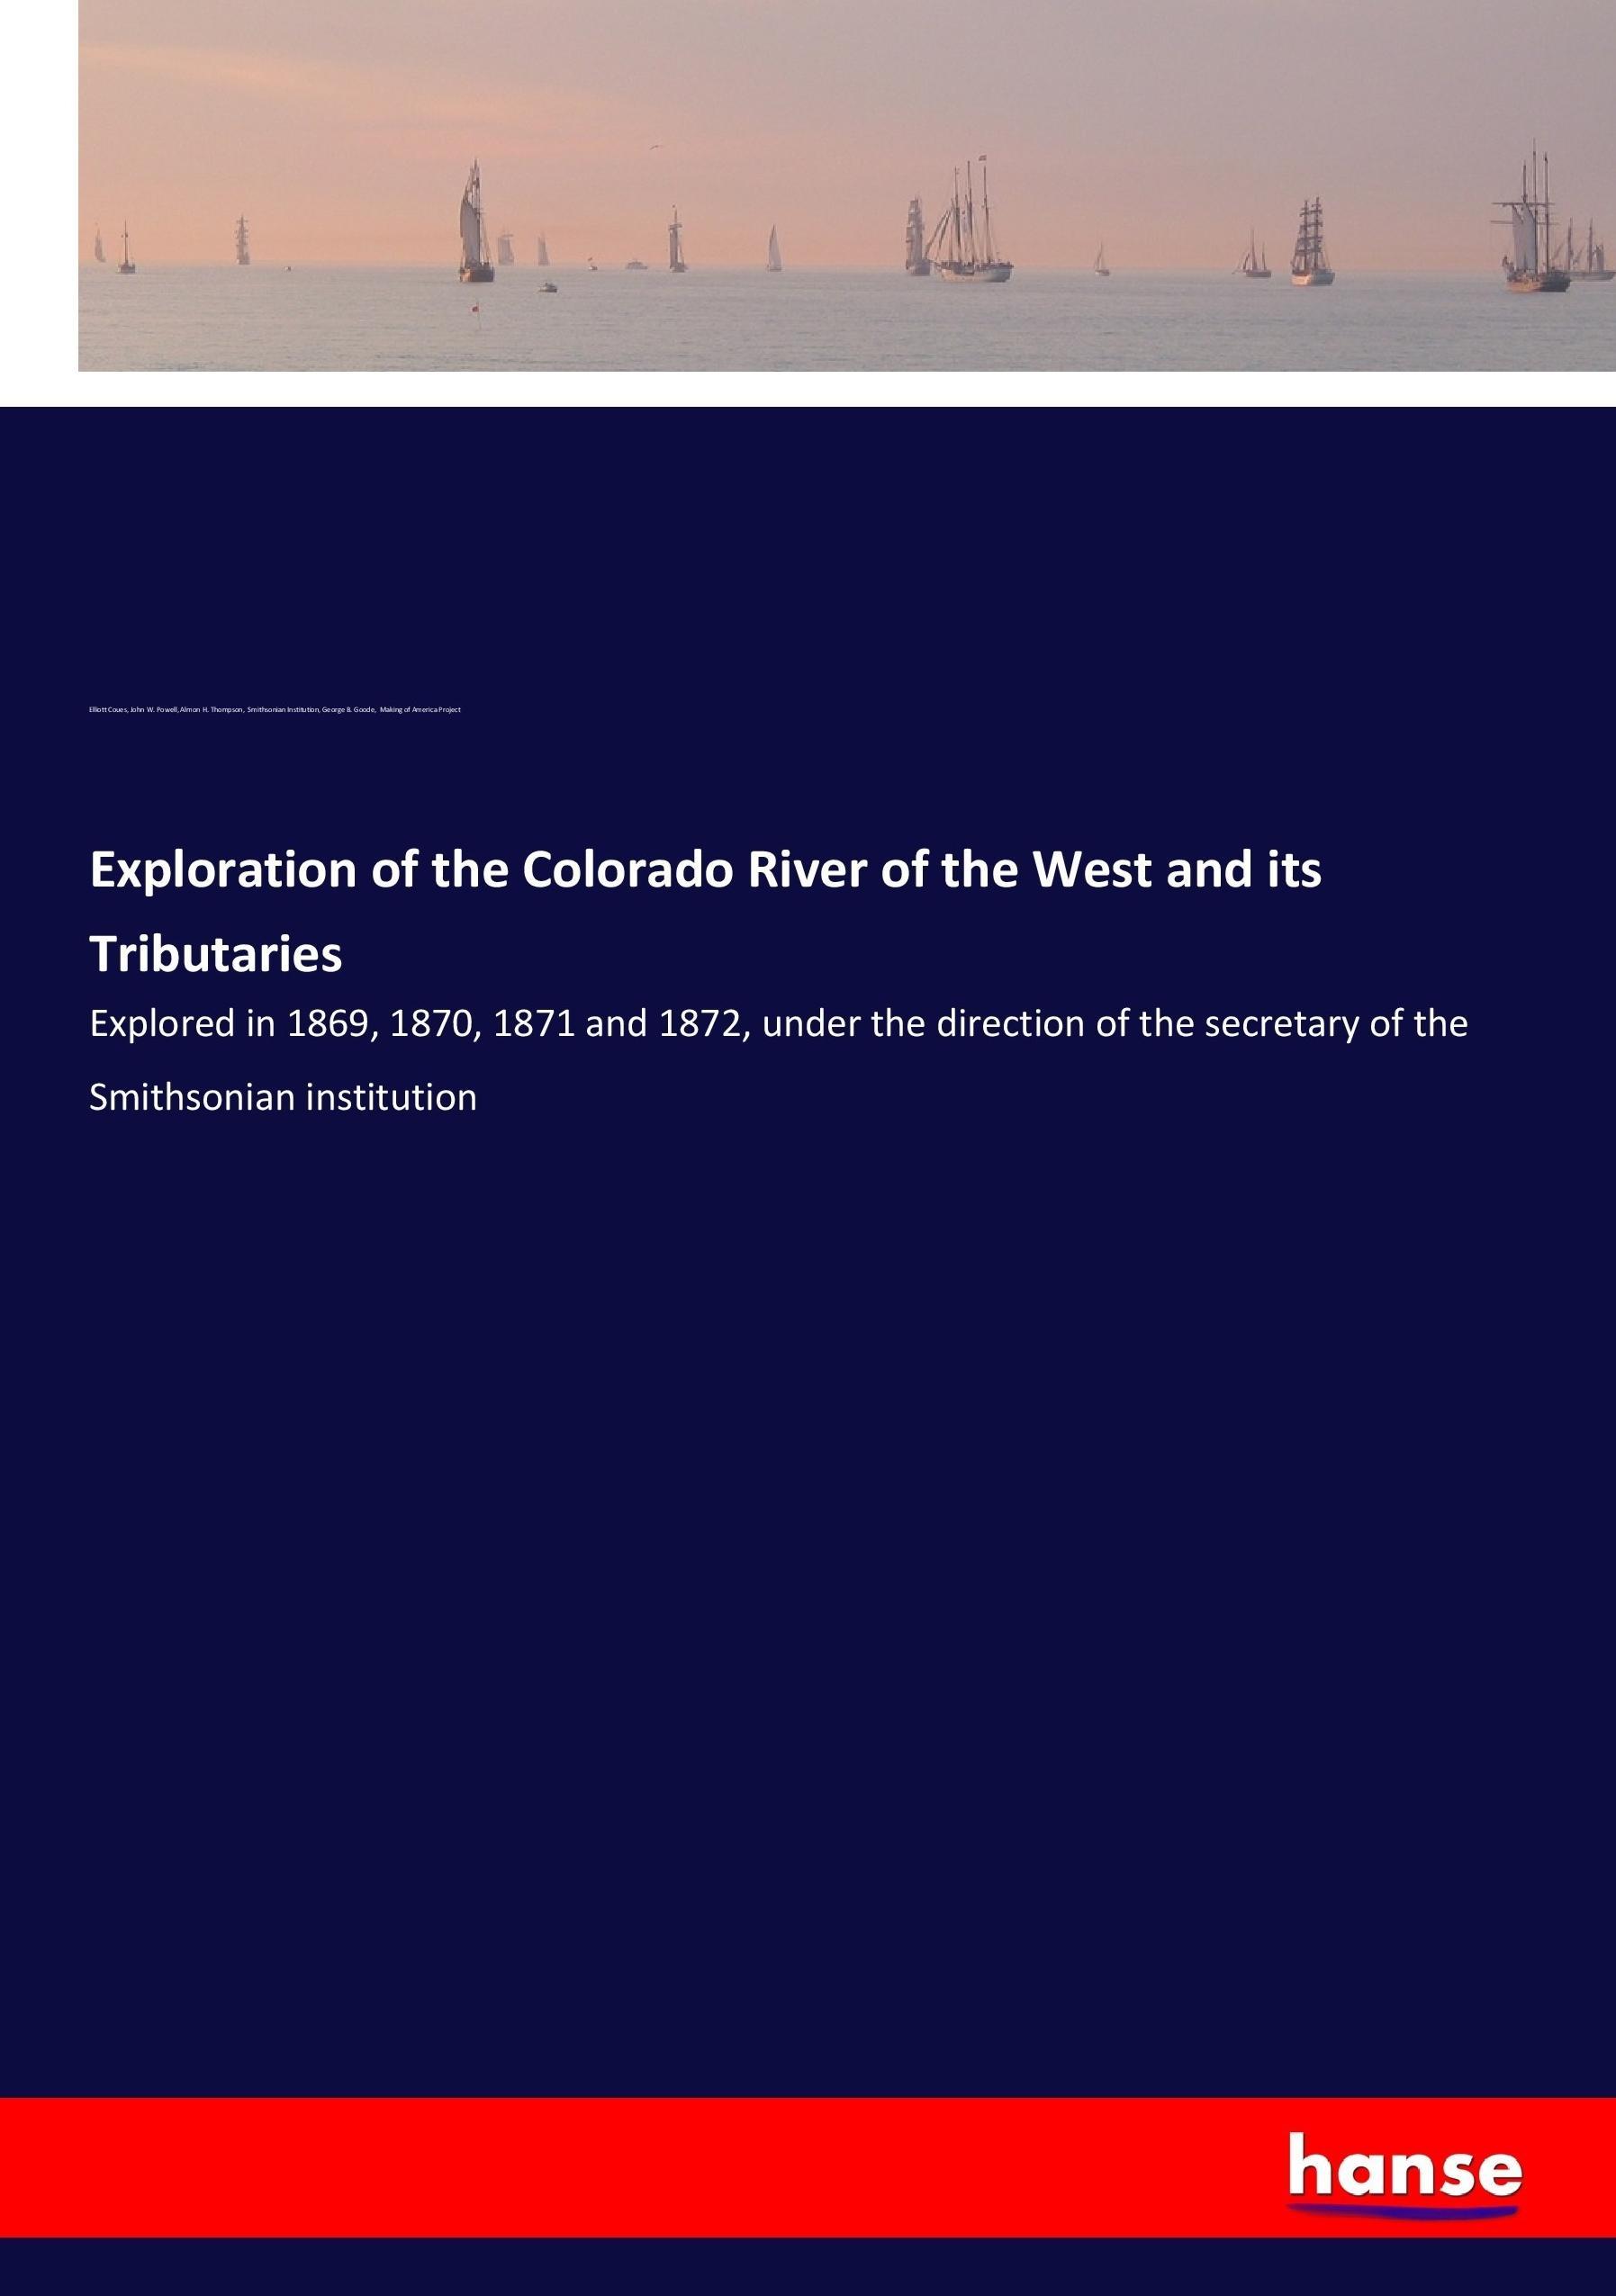 Exploration of the Colorado River of the West and its Tributaries - Coues, Elliott Powell, John W. Thompson, Almon H. Smithsonian Institution Goode, George B. Making of America Project